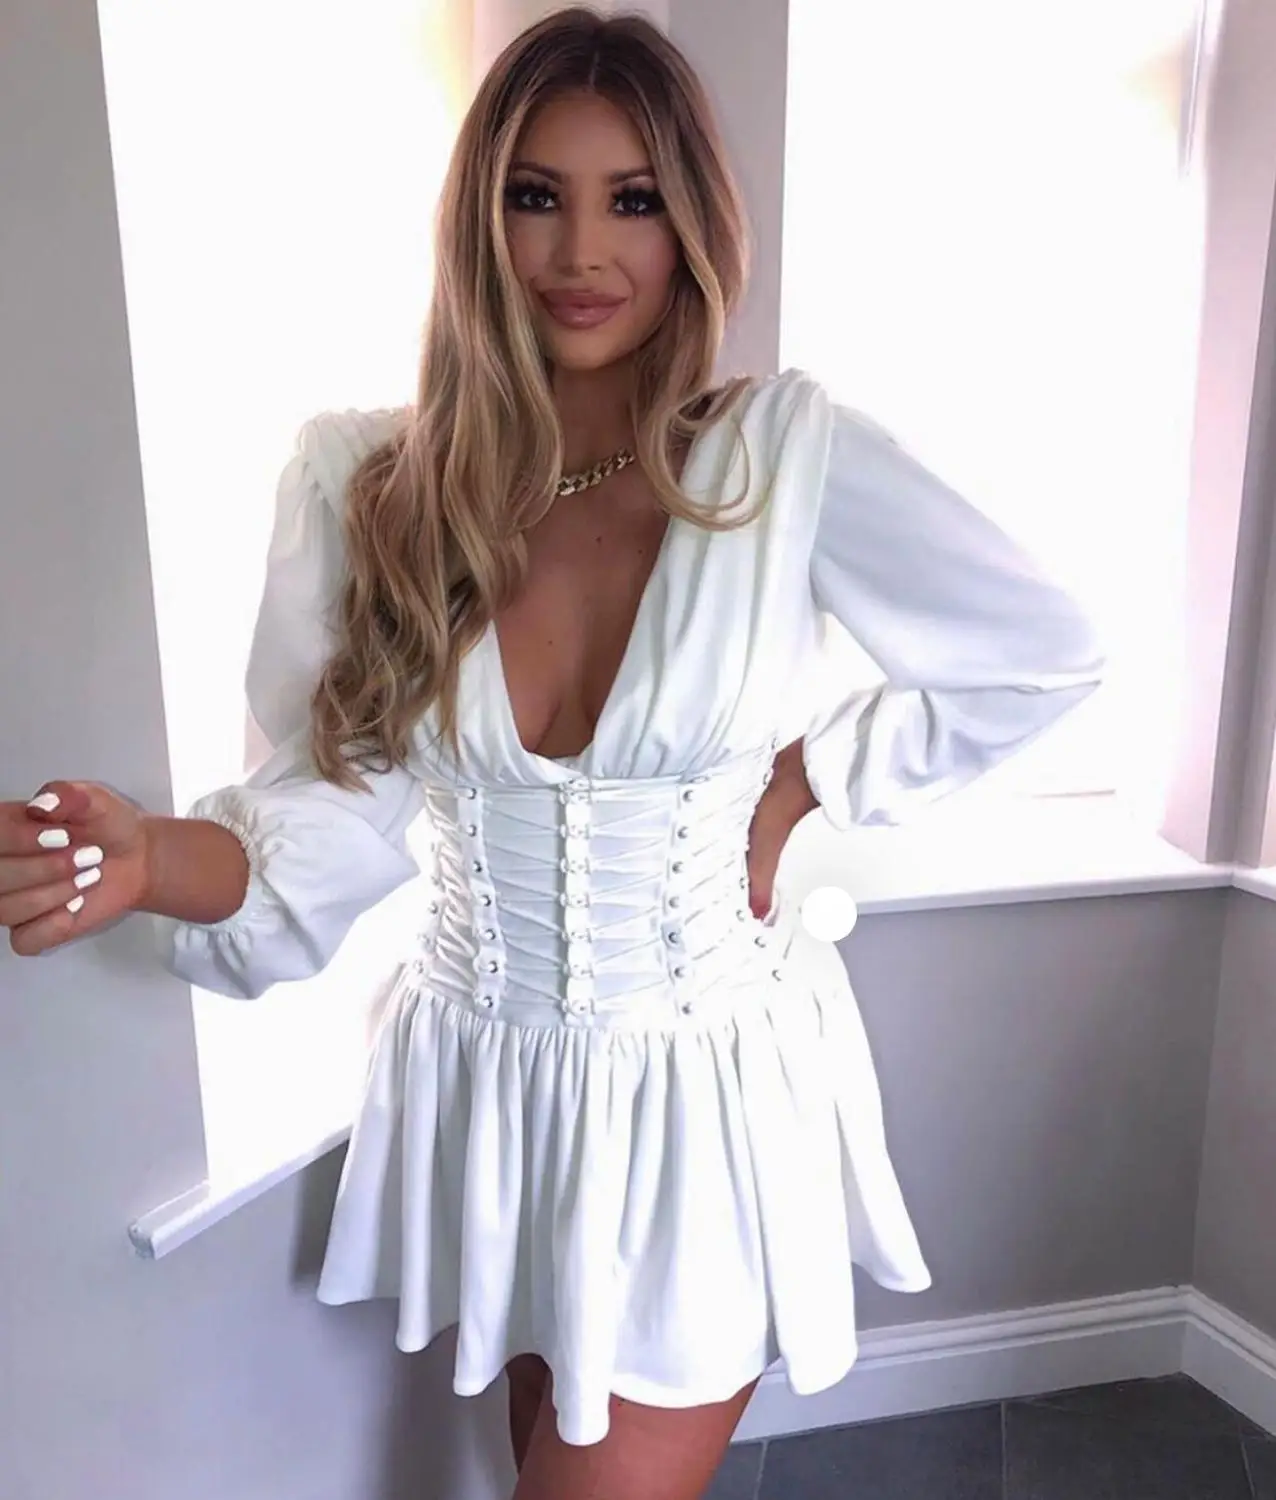 

Babatique 2021 New Fashion White Dress Cross Lace-up Design Puff Sleeves Sexy V Neck Celebrity Party Club Mini Dress